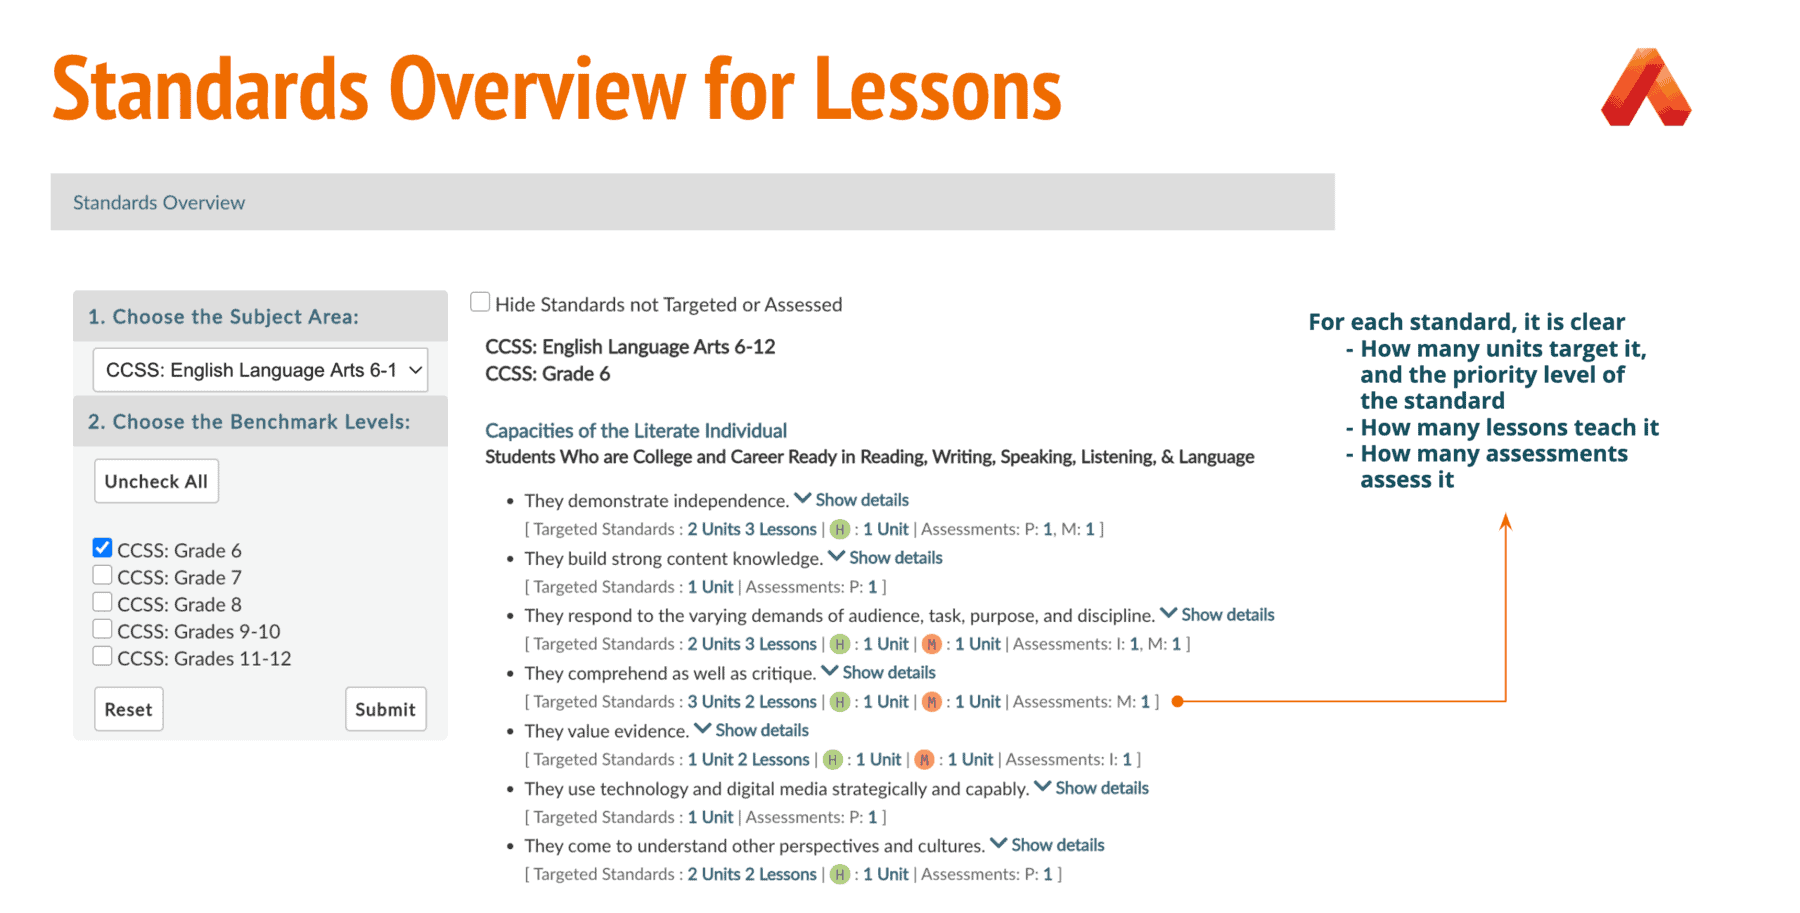 Standards Overview for Lessons